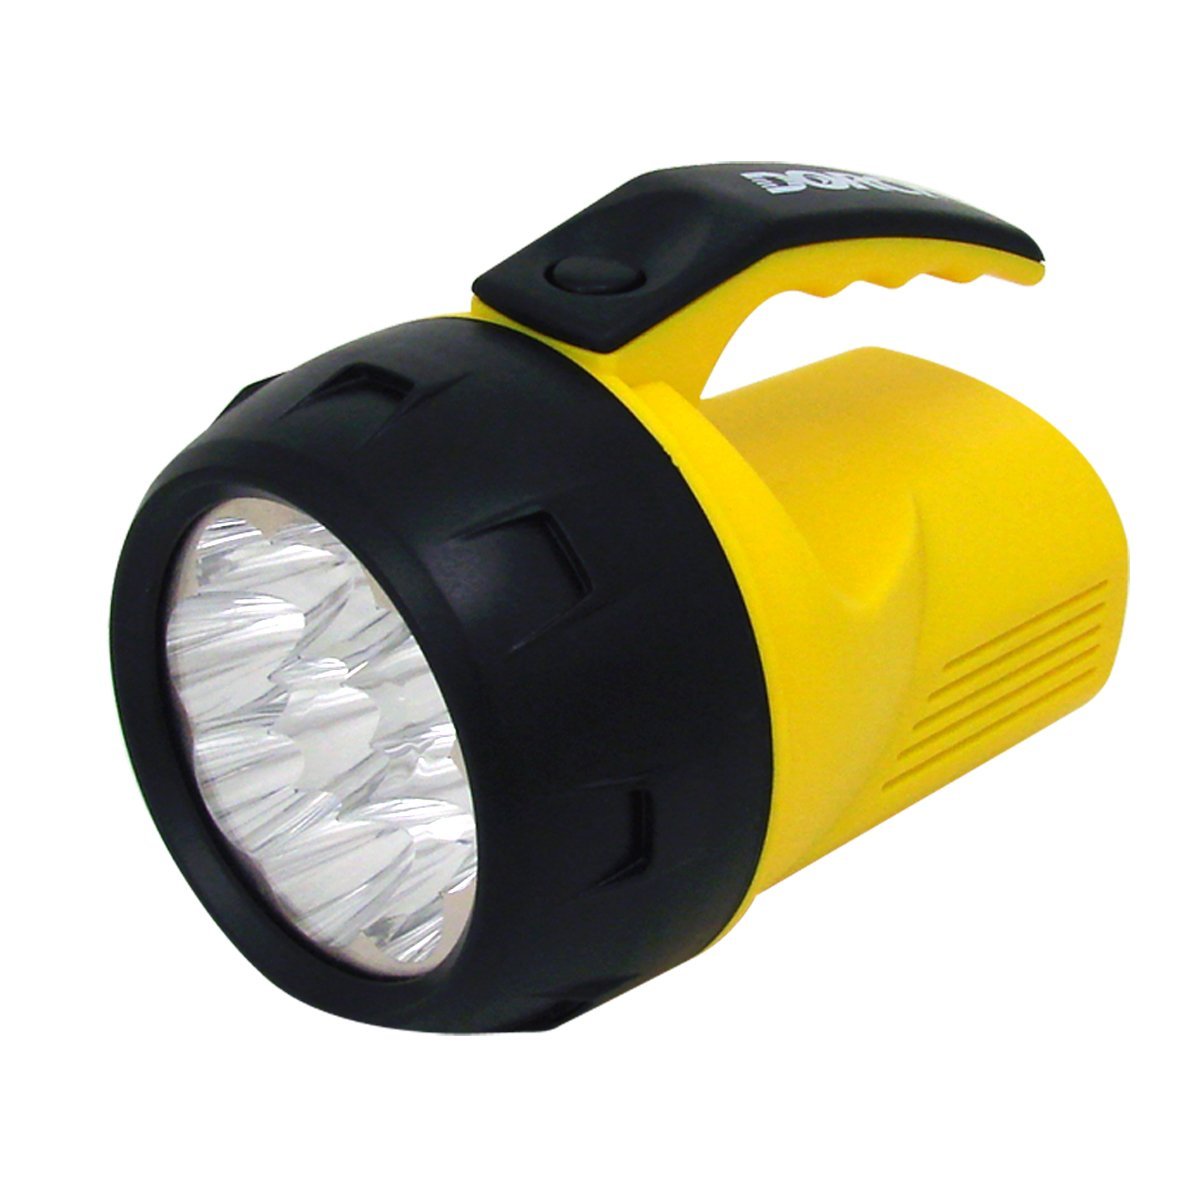 Amazon.com Top Rated: The best in Flashlight Lanterns based on ...